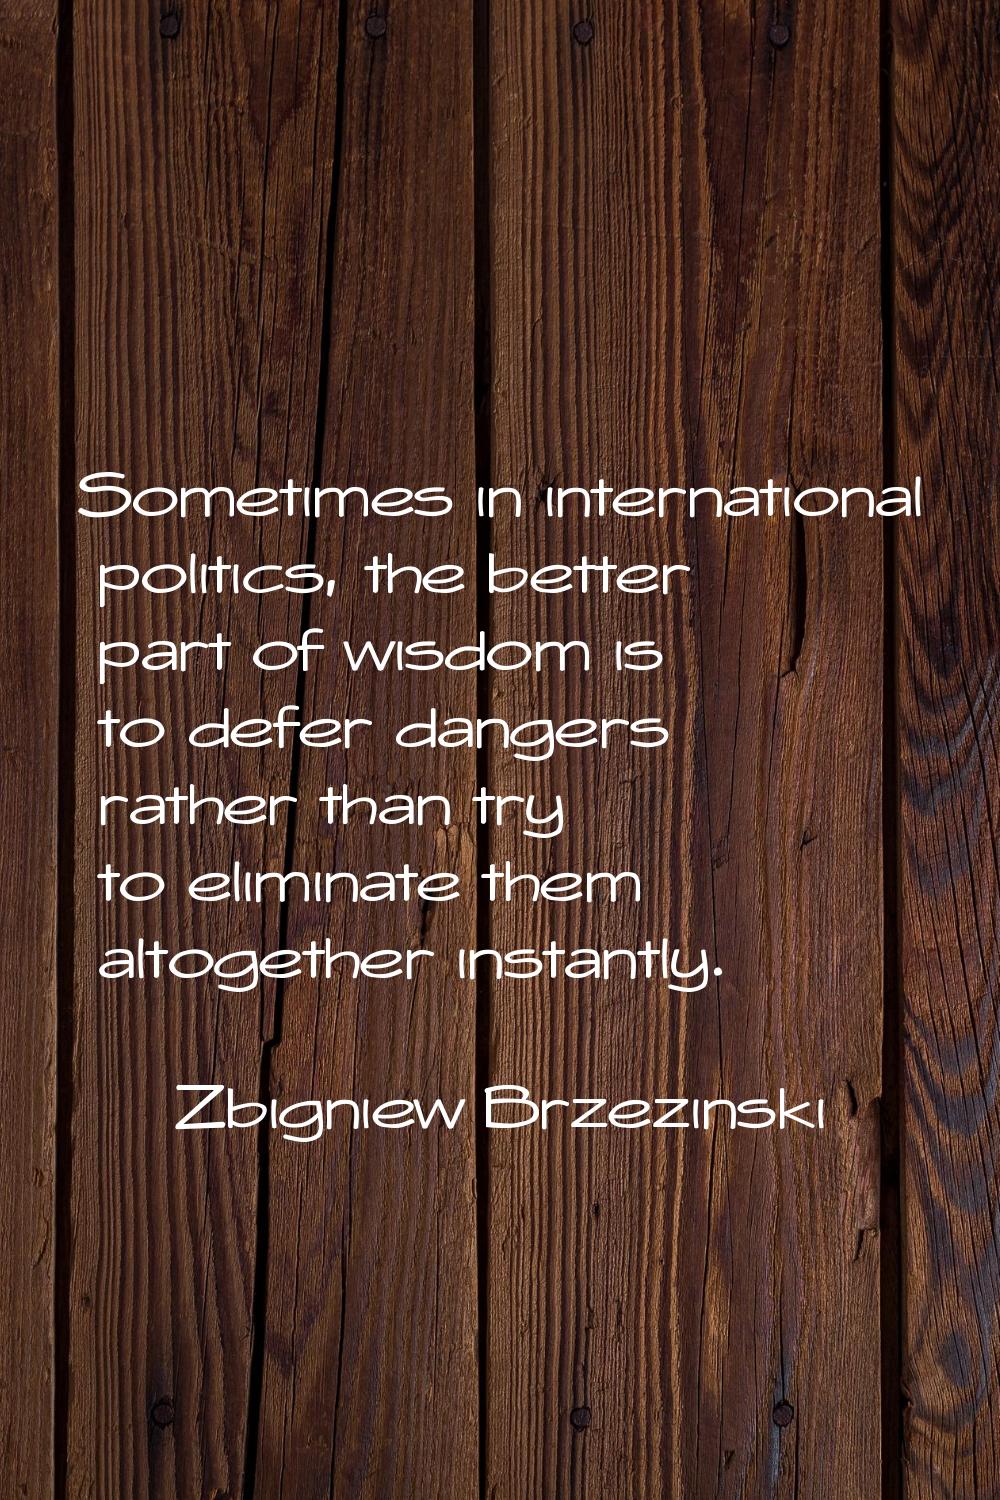 Sometimes in international politics, the better part of wisdom is to defer dangers rather than try 